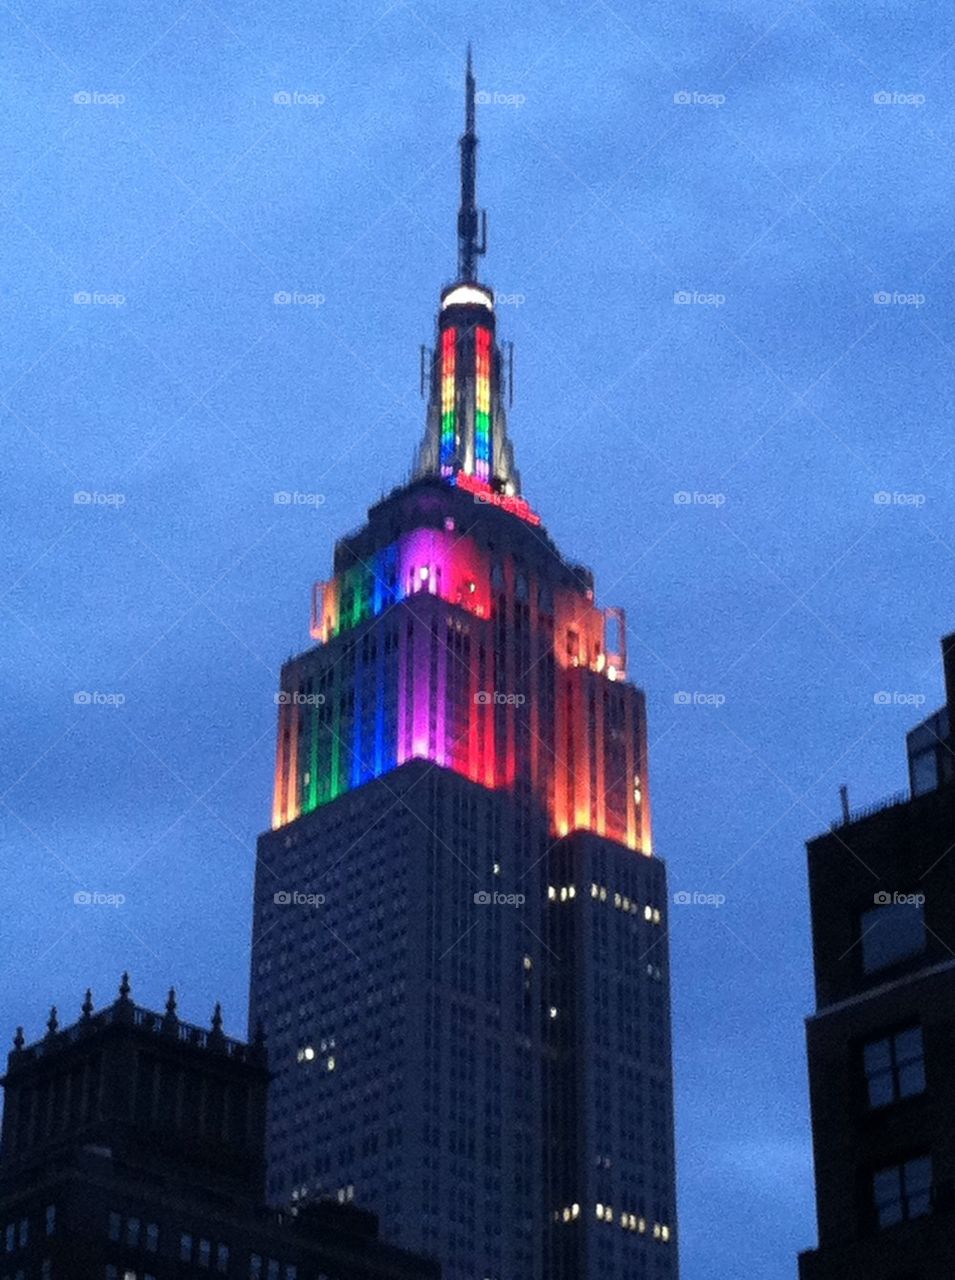 NYC shows its pride